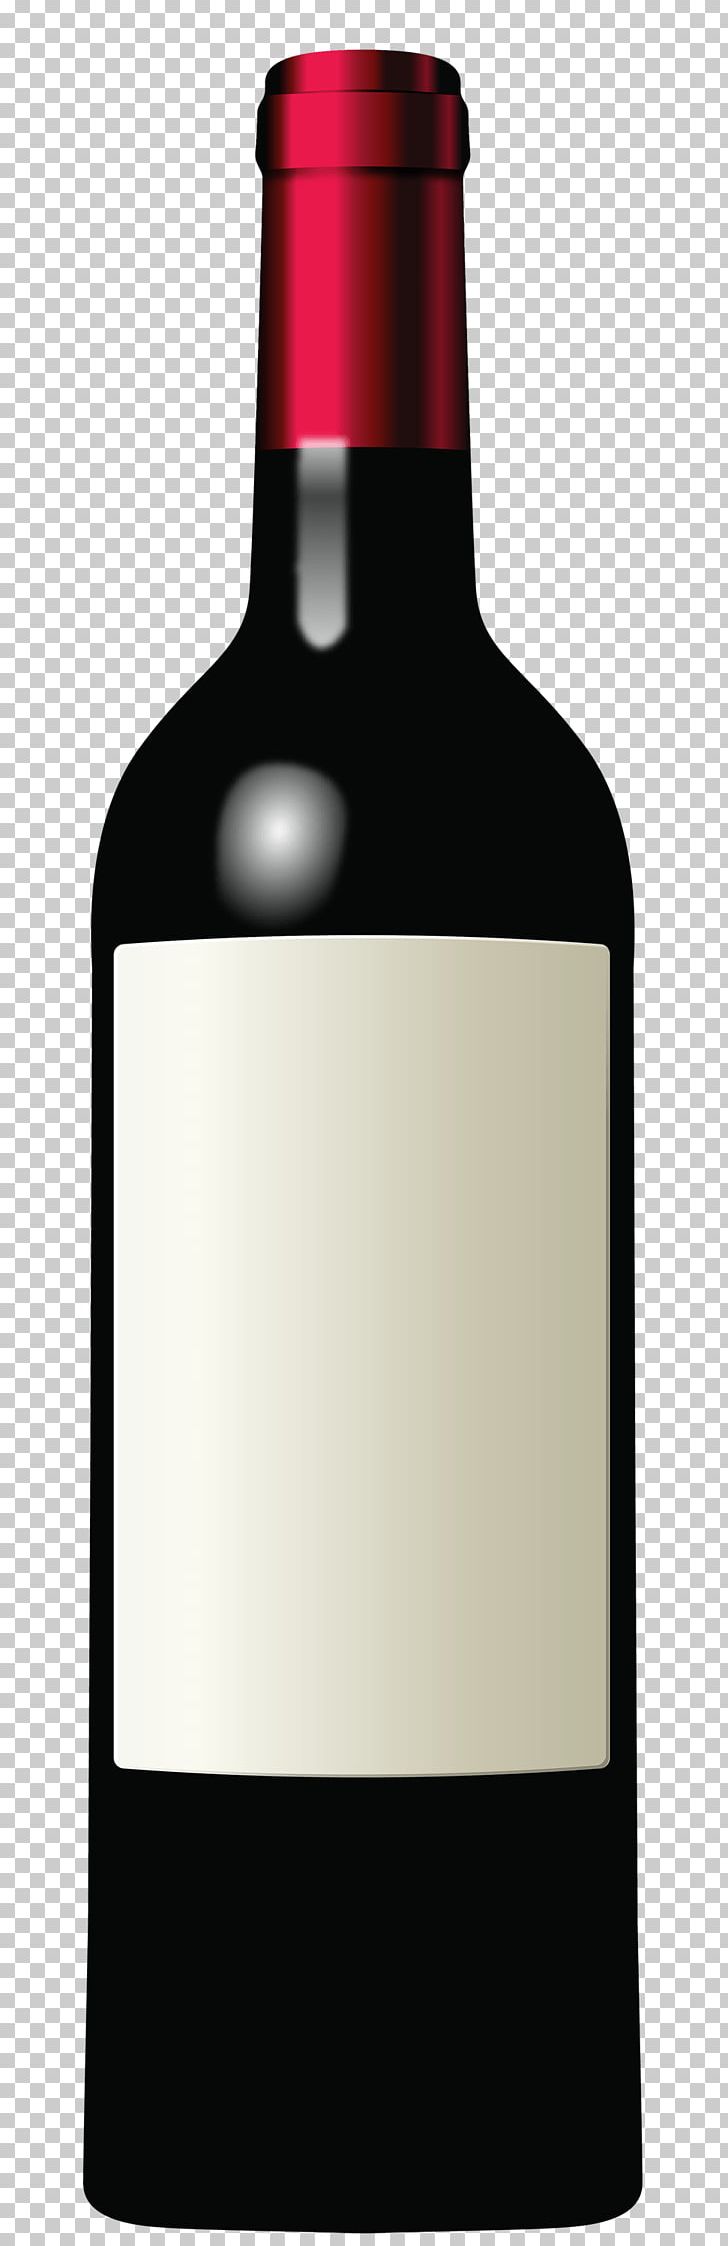 Bottle Wine Red Whitelabel PNG, Clipart, Bottle, Objects Free PNG Download